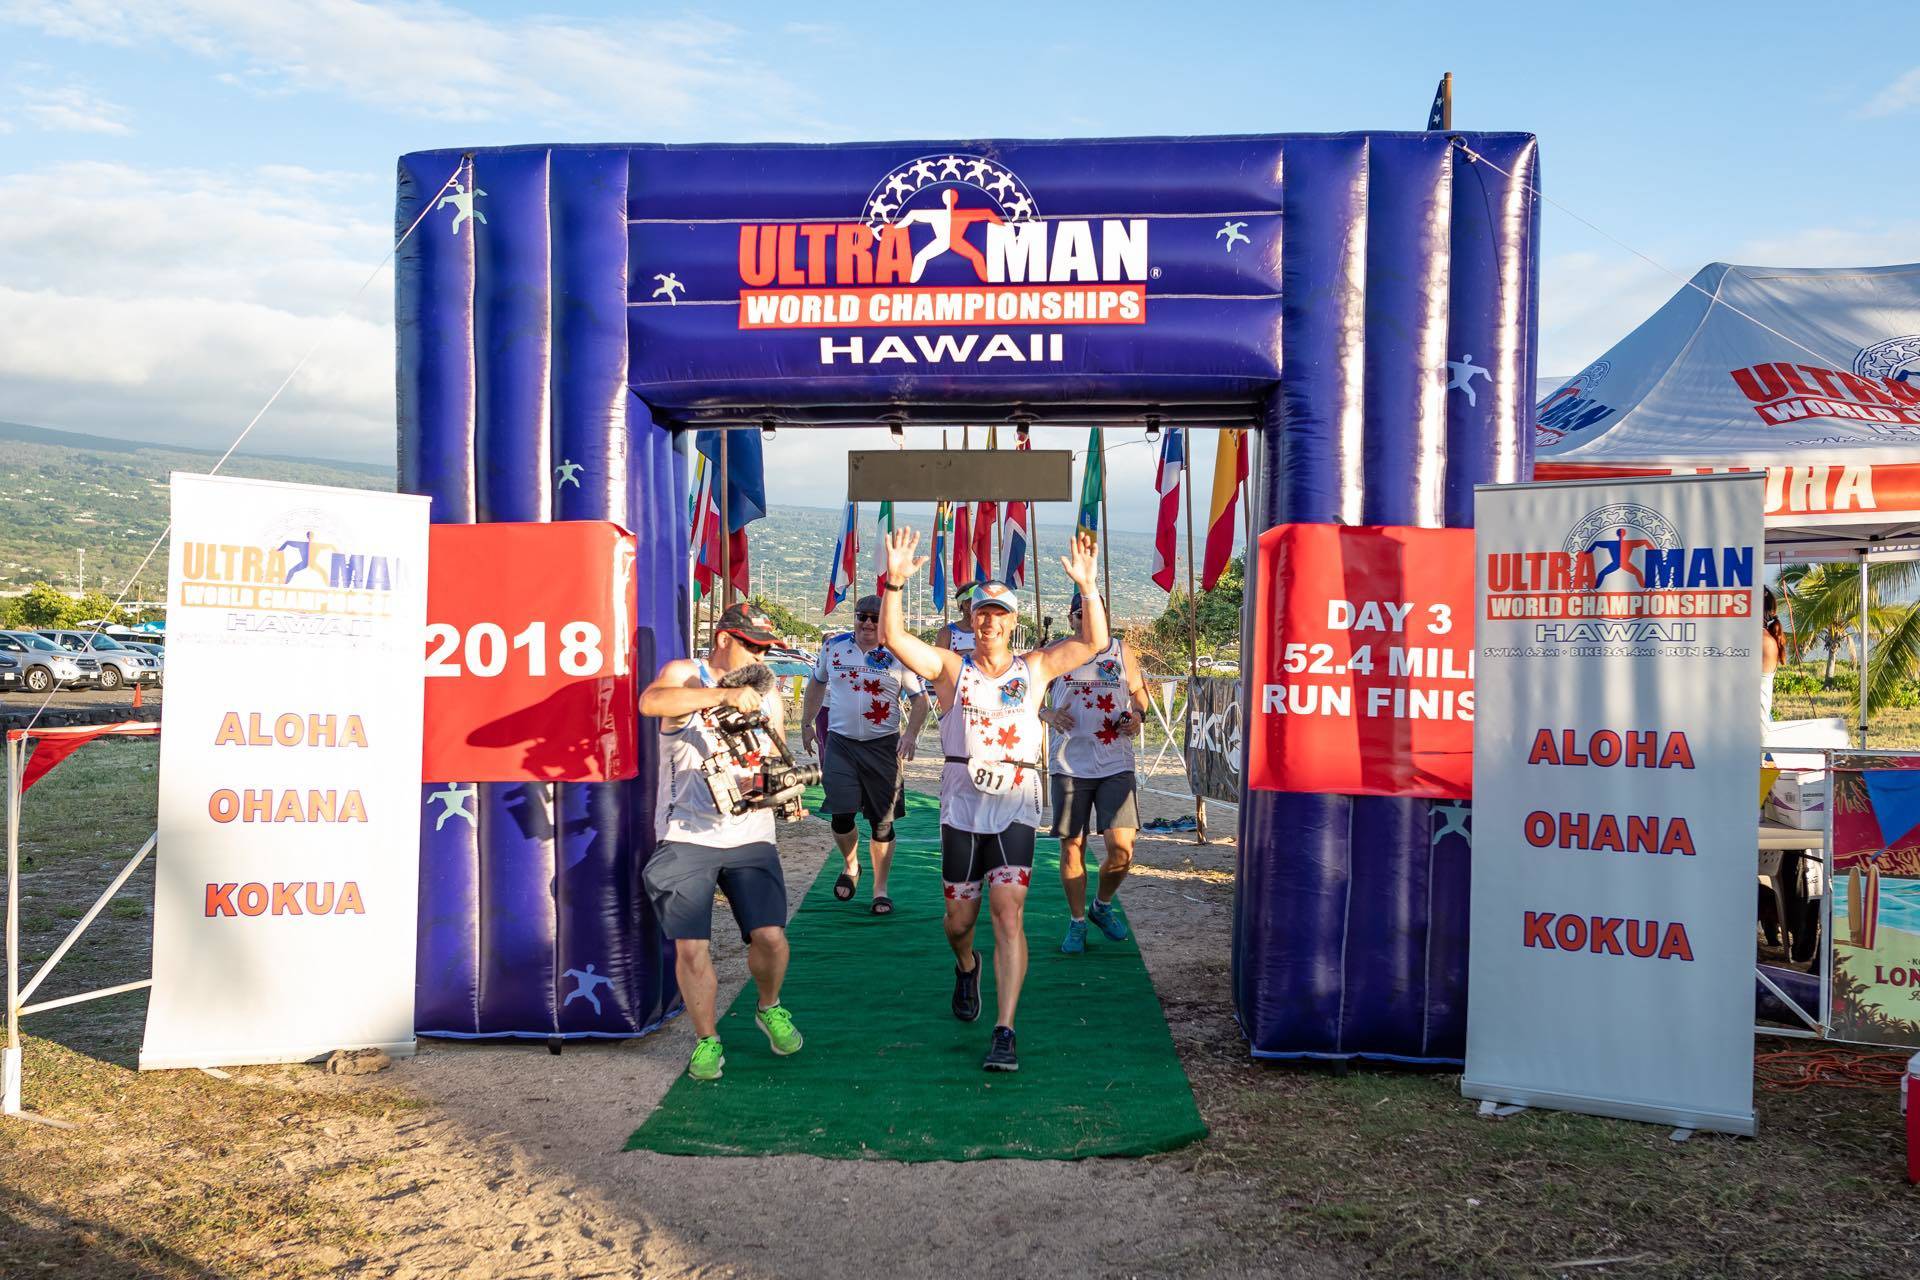 Scott McDermott crosses the finish line on day three of the 2018 Ultraman World Championships in Kona, Hawaii. Finishing the race meant closure and healing for McDermott and his loved ones after a near life-ending crash during his last visit to the World Championships in 2015. This year’s race was held Nov. 23-25.